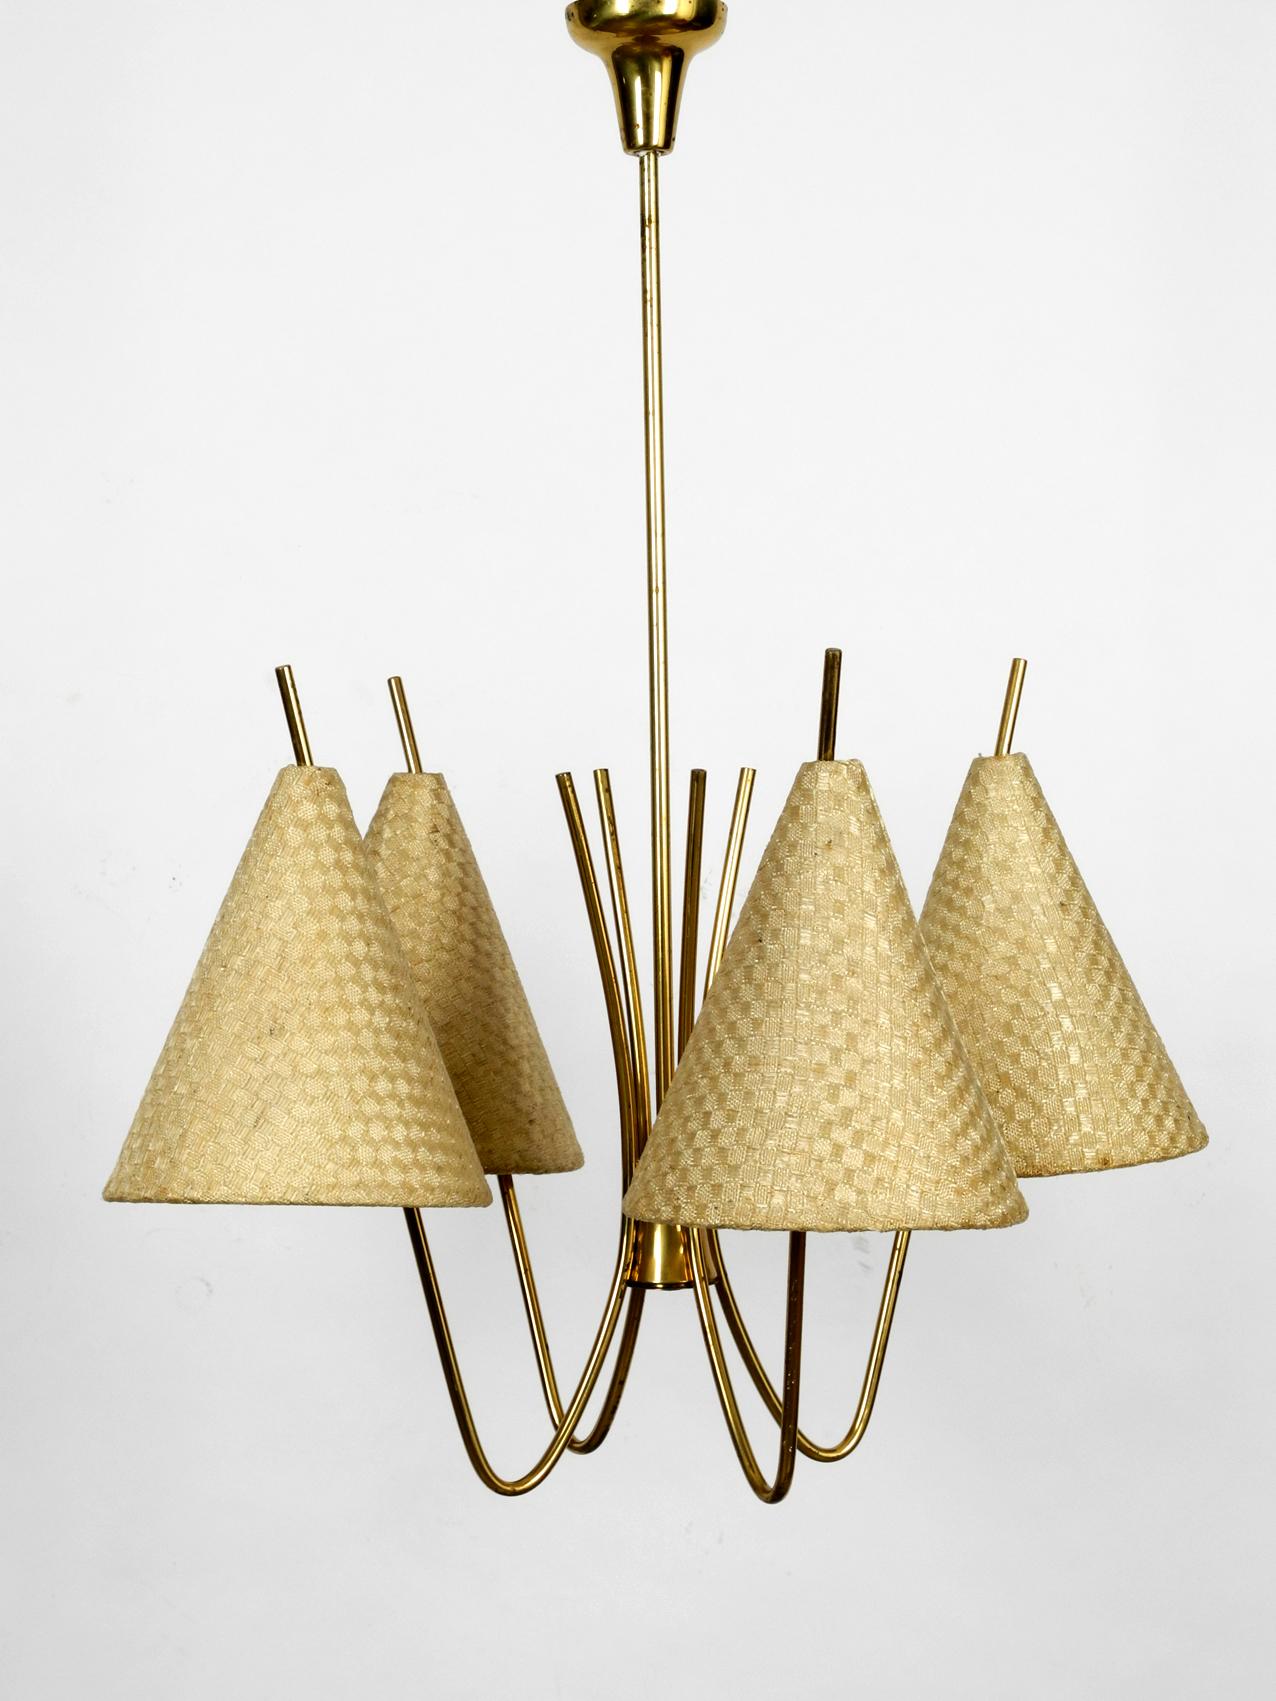 1960s Brass Ceiling Lamp with Bast Shades by J. T. Kalmar Made in Austria 1